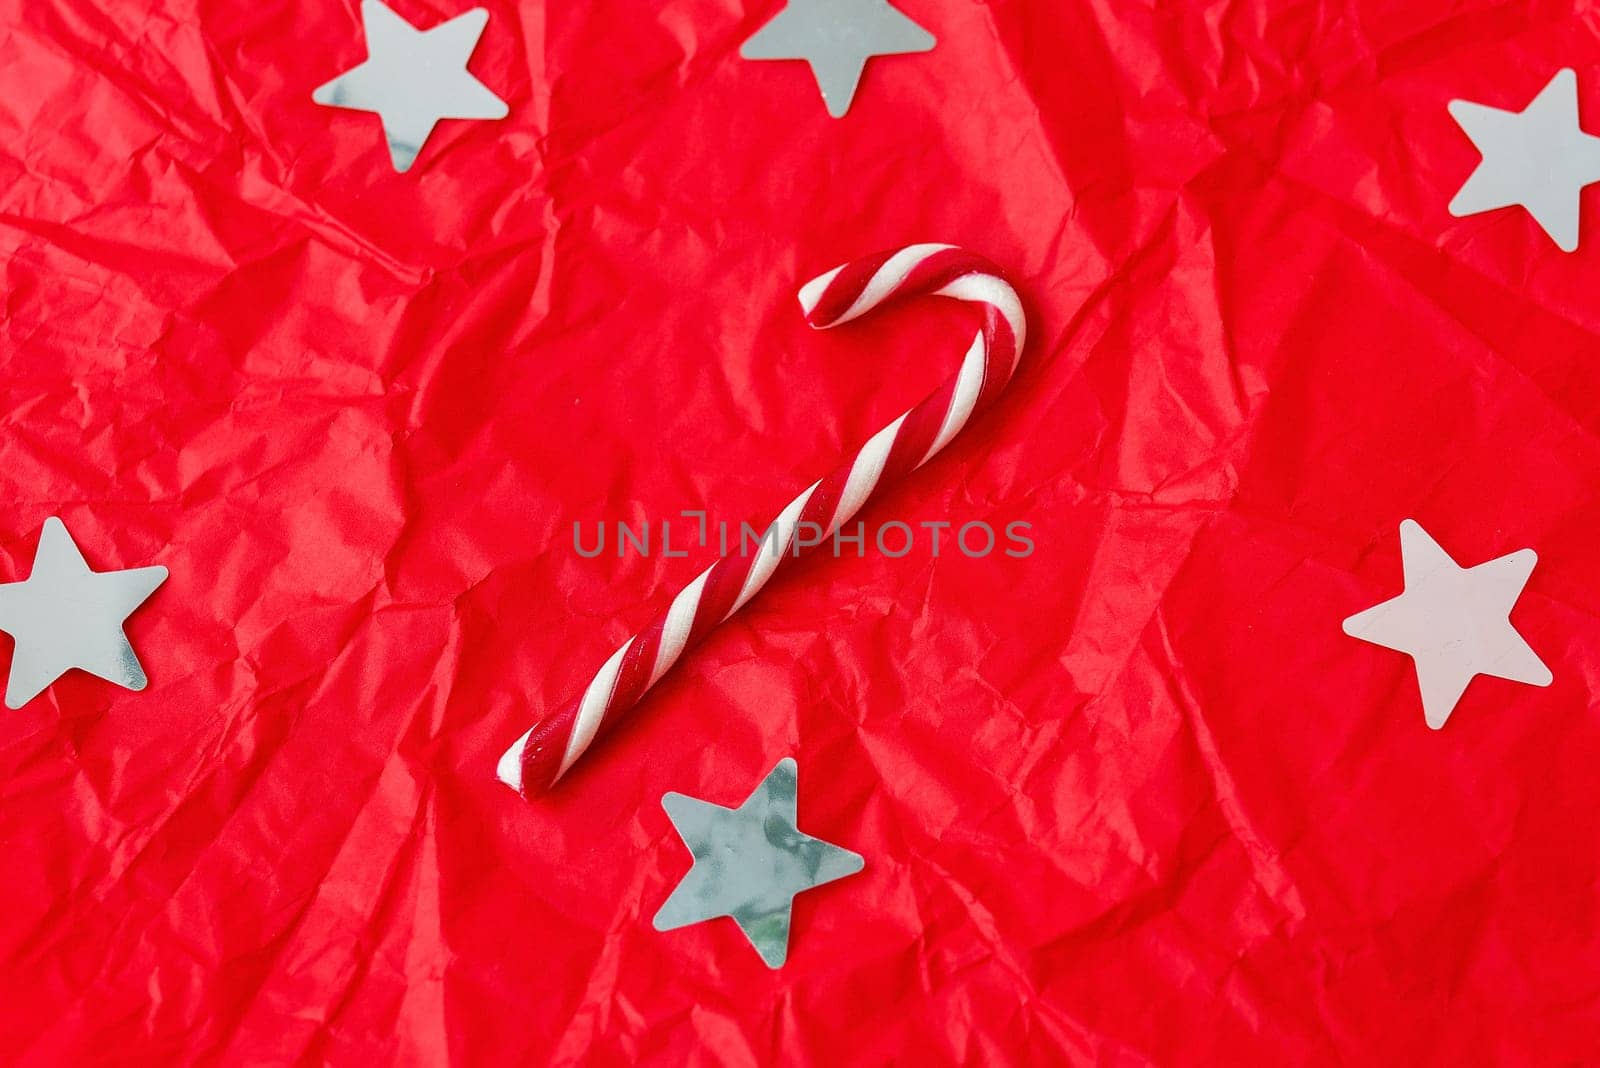 This is a bright and colorful Christmas background with white stars, a candy cane, and a crumpled texture. by sfinks